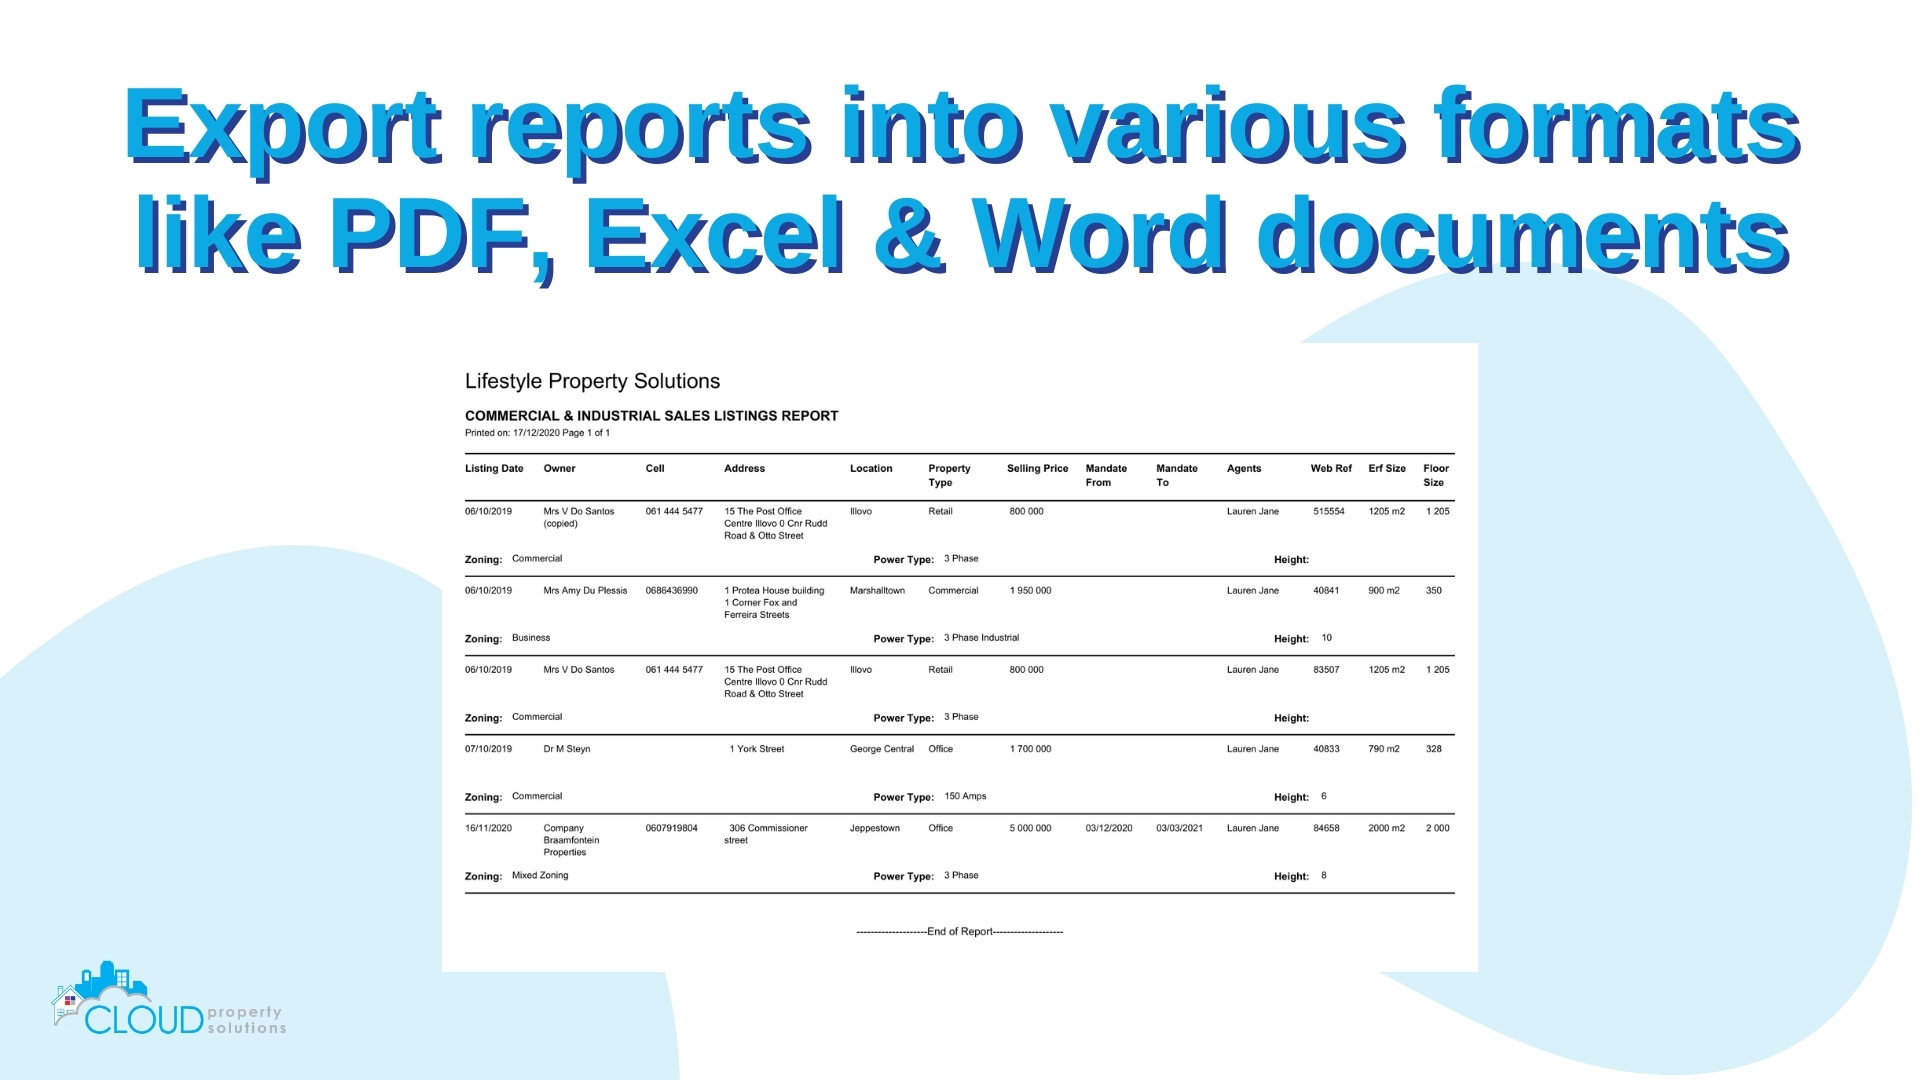 Download reports into various formats.